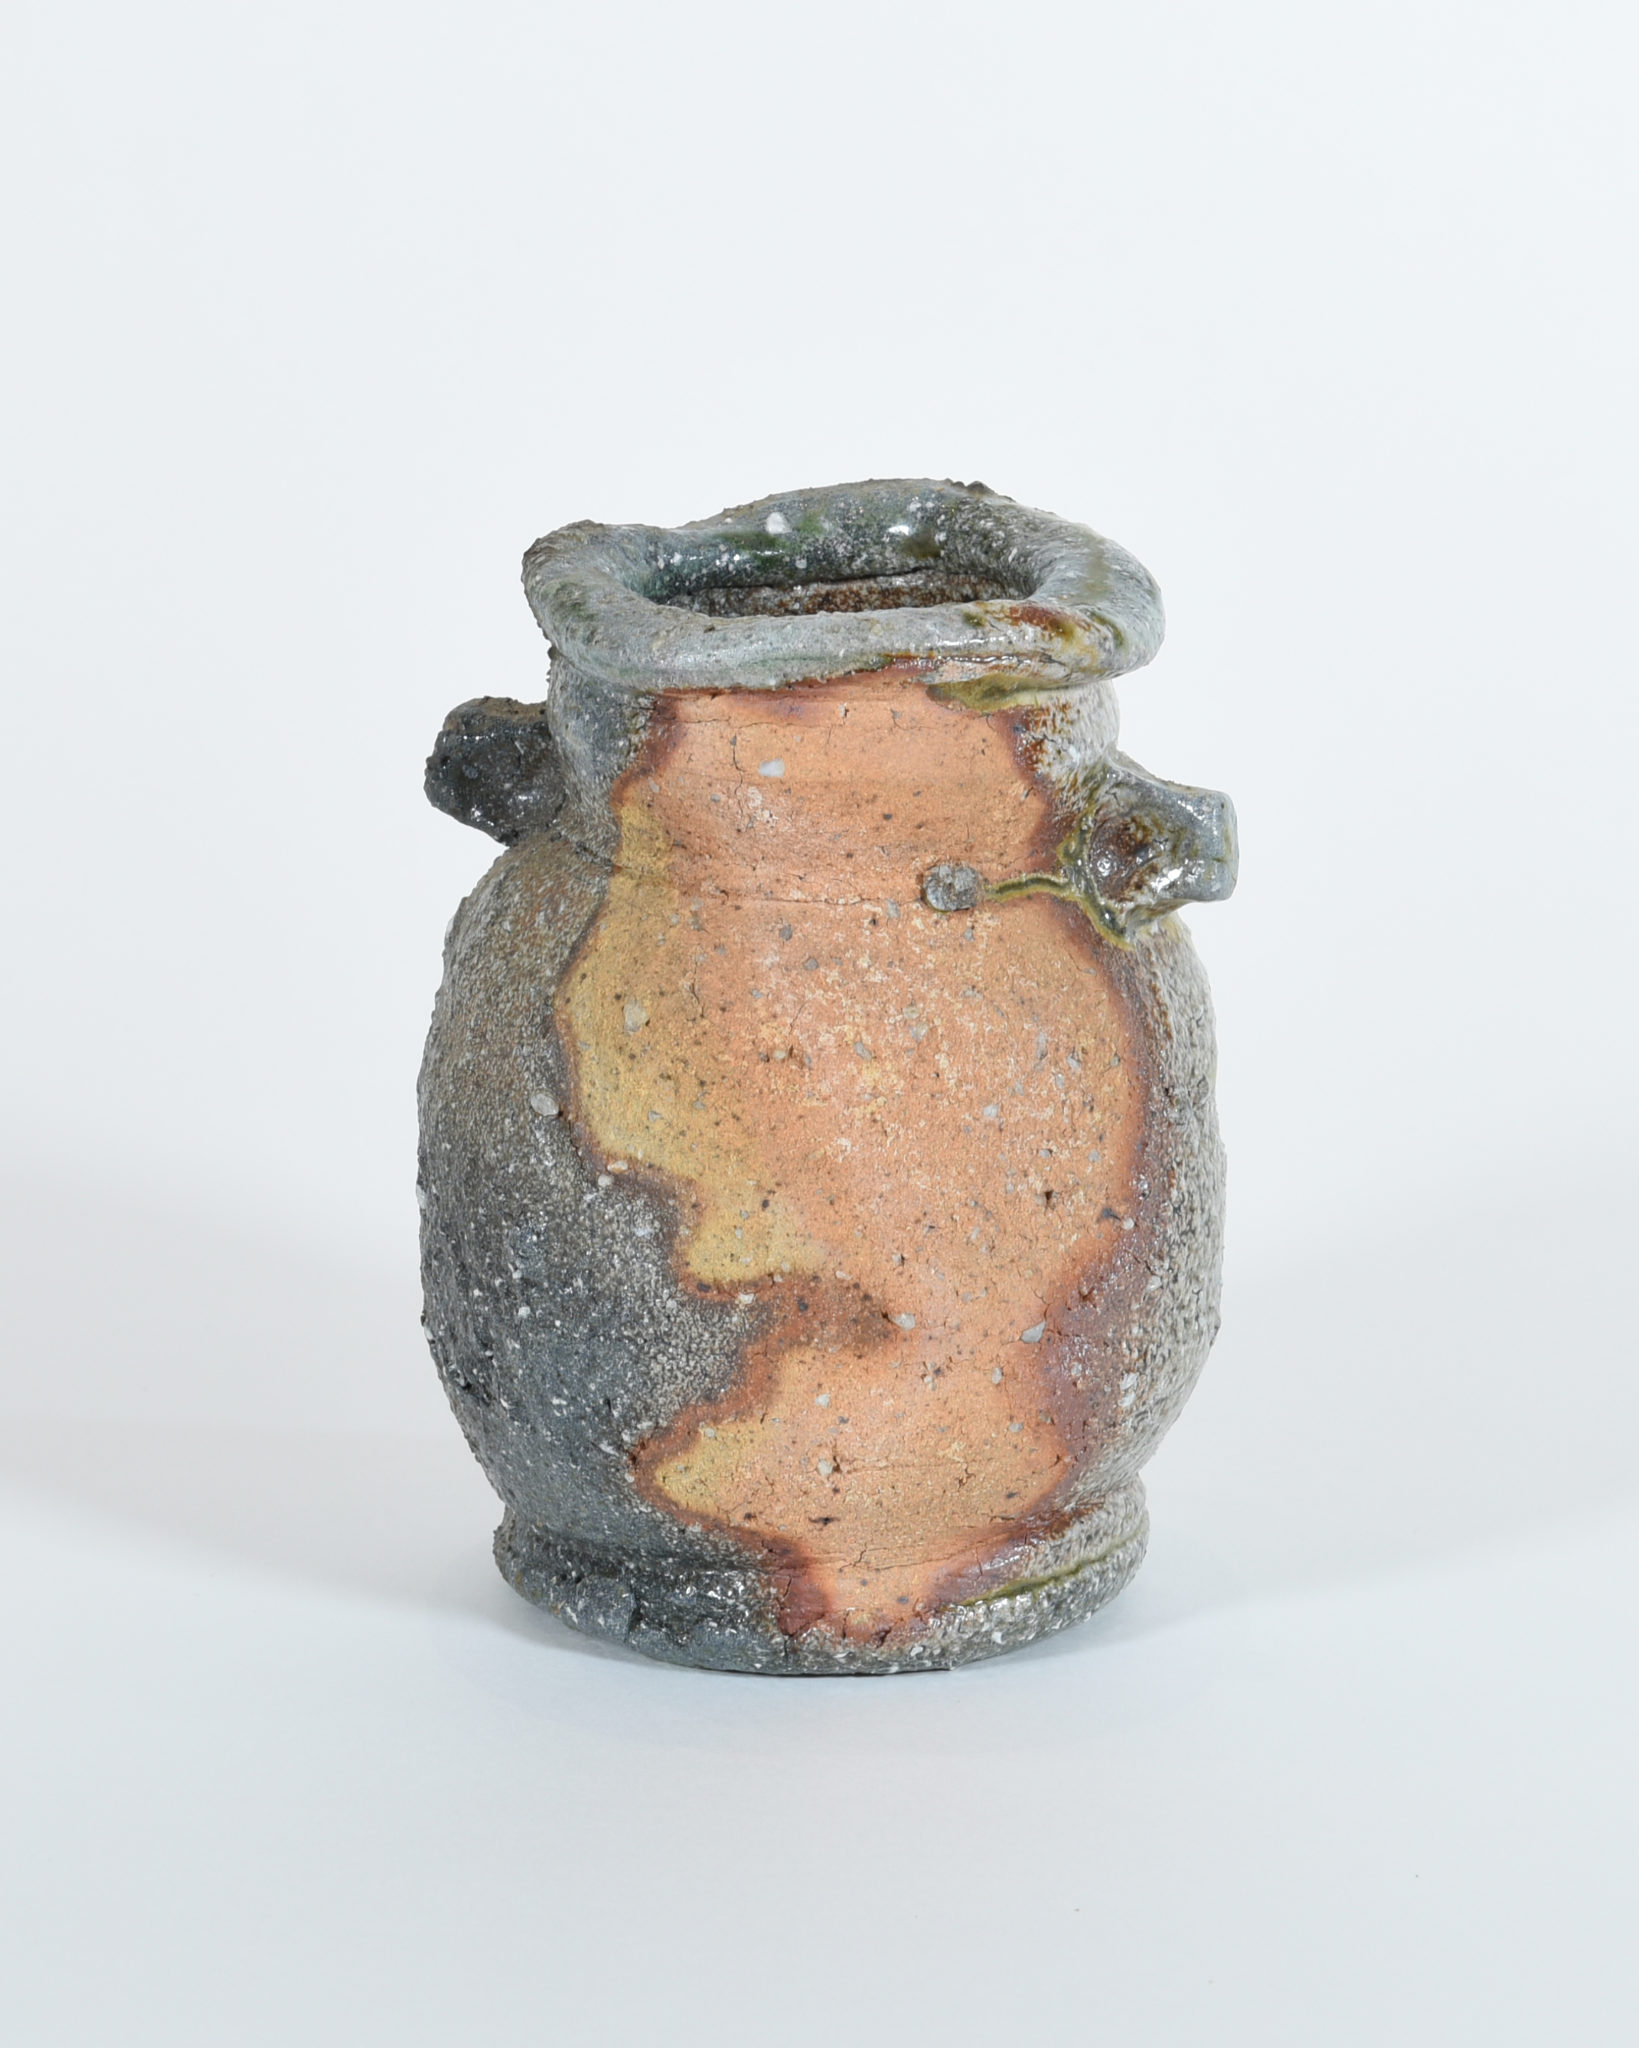 Owen Rye, Vase 7, 1995, Woodfired ceramic and ash, 19 x 14 x 14 cm, Latrobe Regional Gallery Collection, purchased 2019.